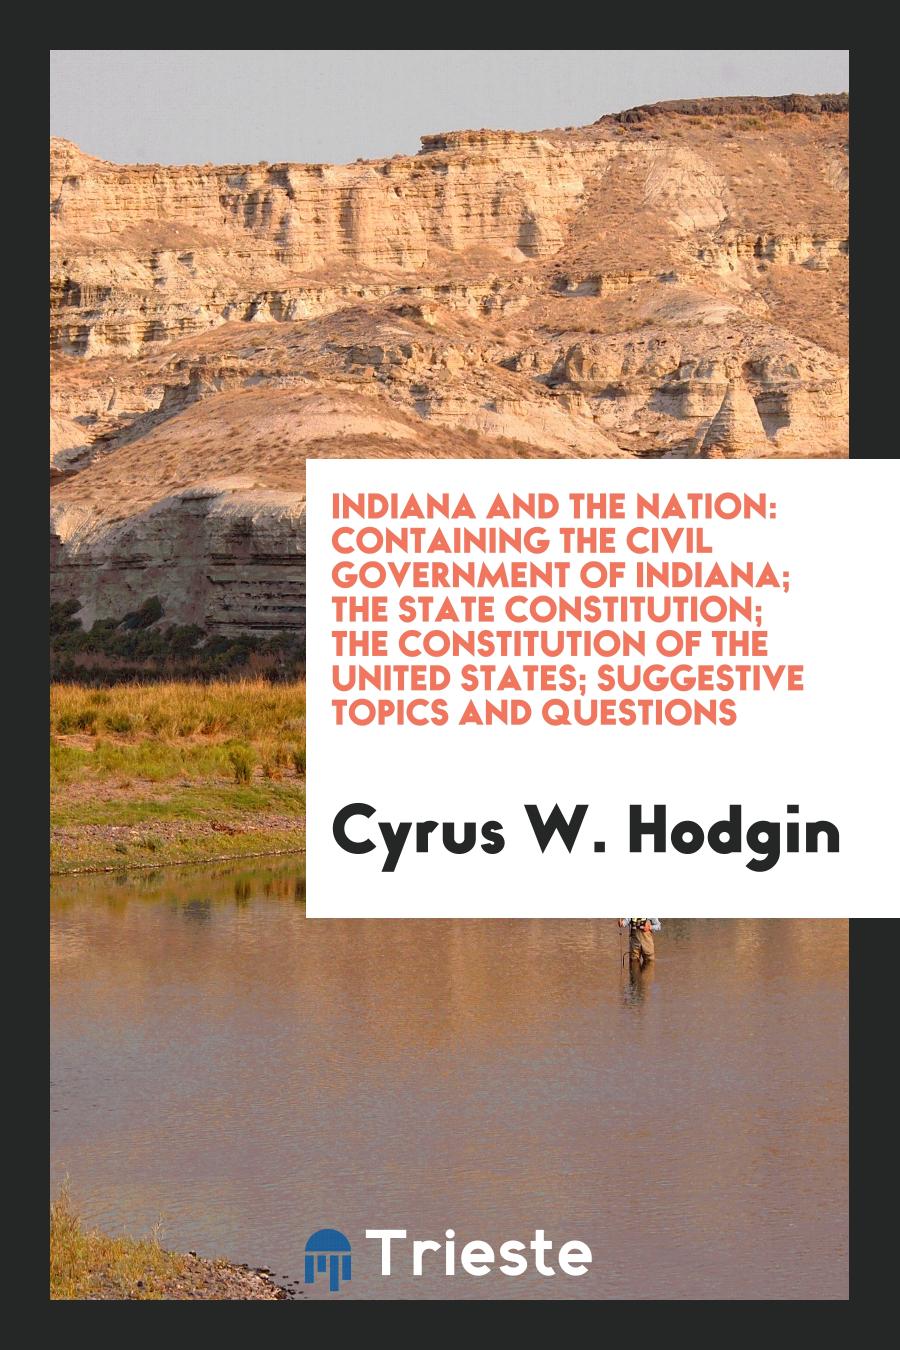 Indiana and the Nation: Containing the Civil Government of Indiana; The State Constitution; The Constitution of the United States; Suggestive Topics and Questions